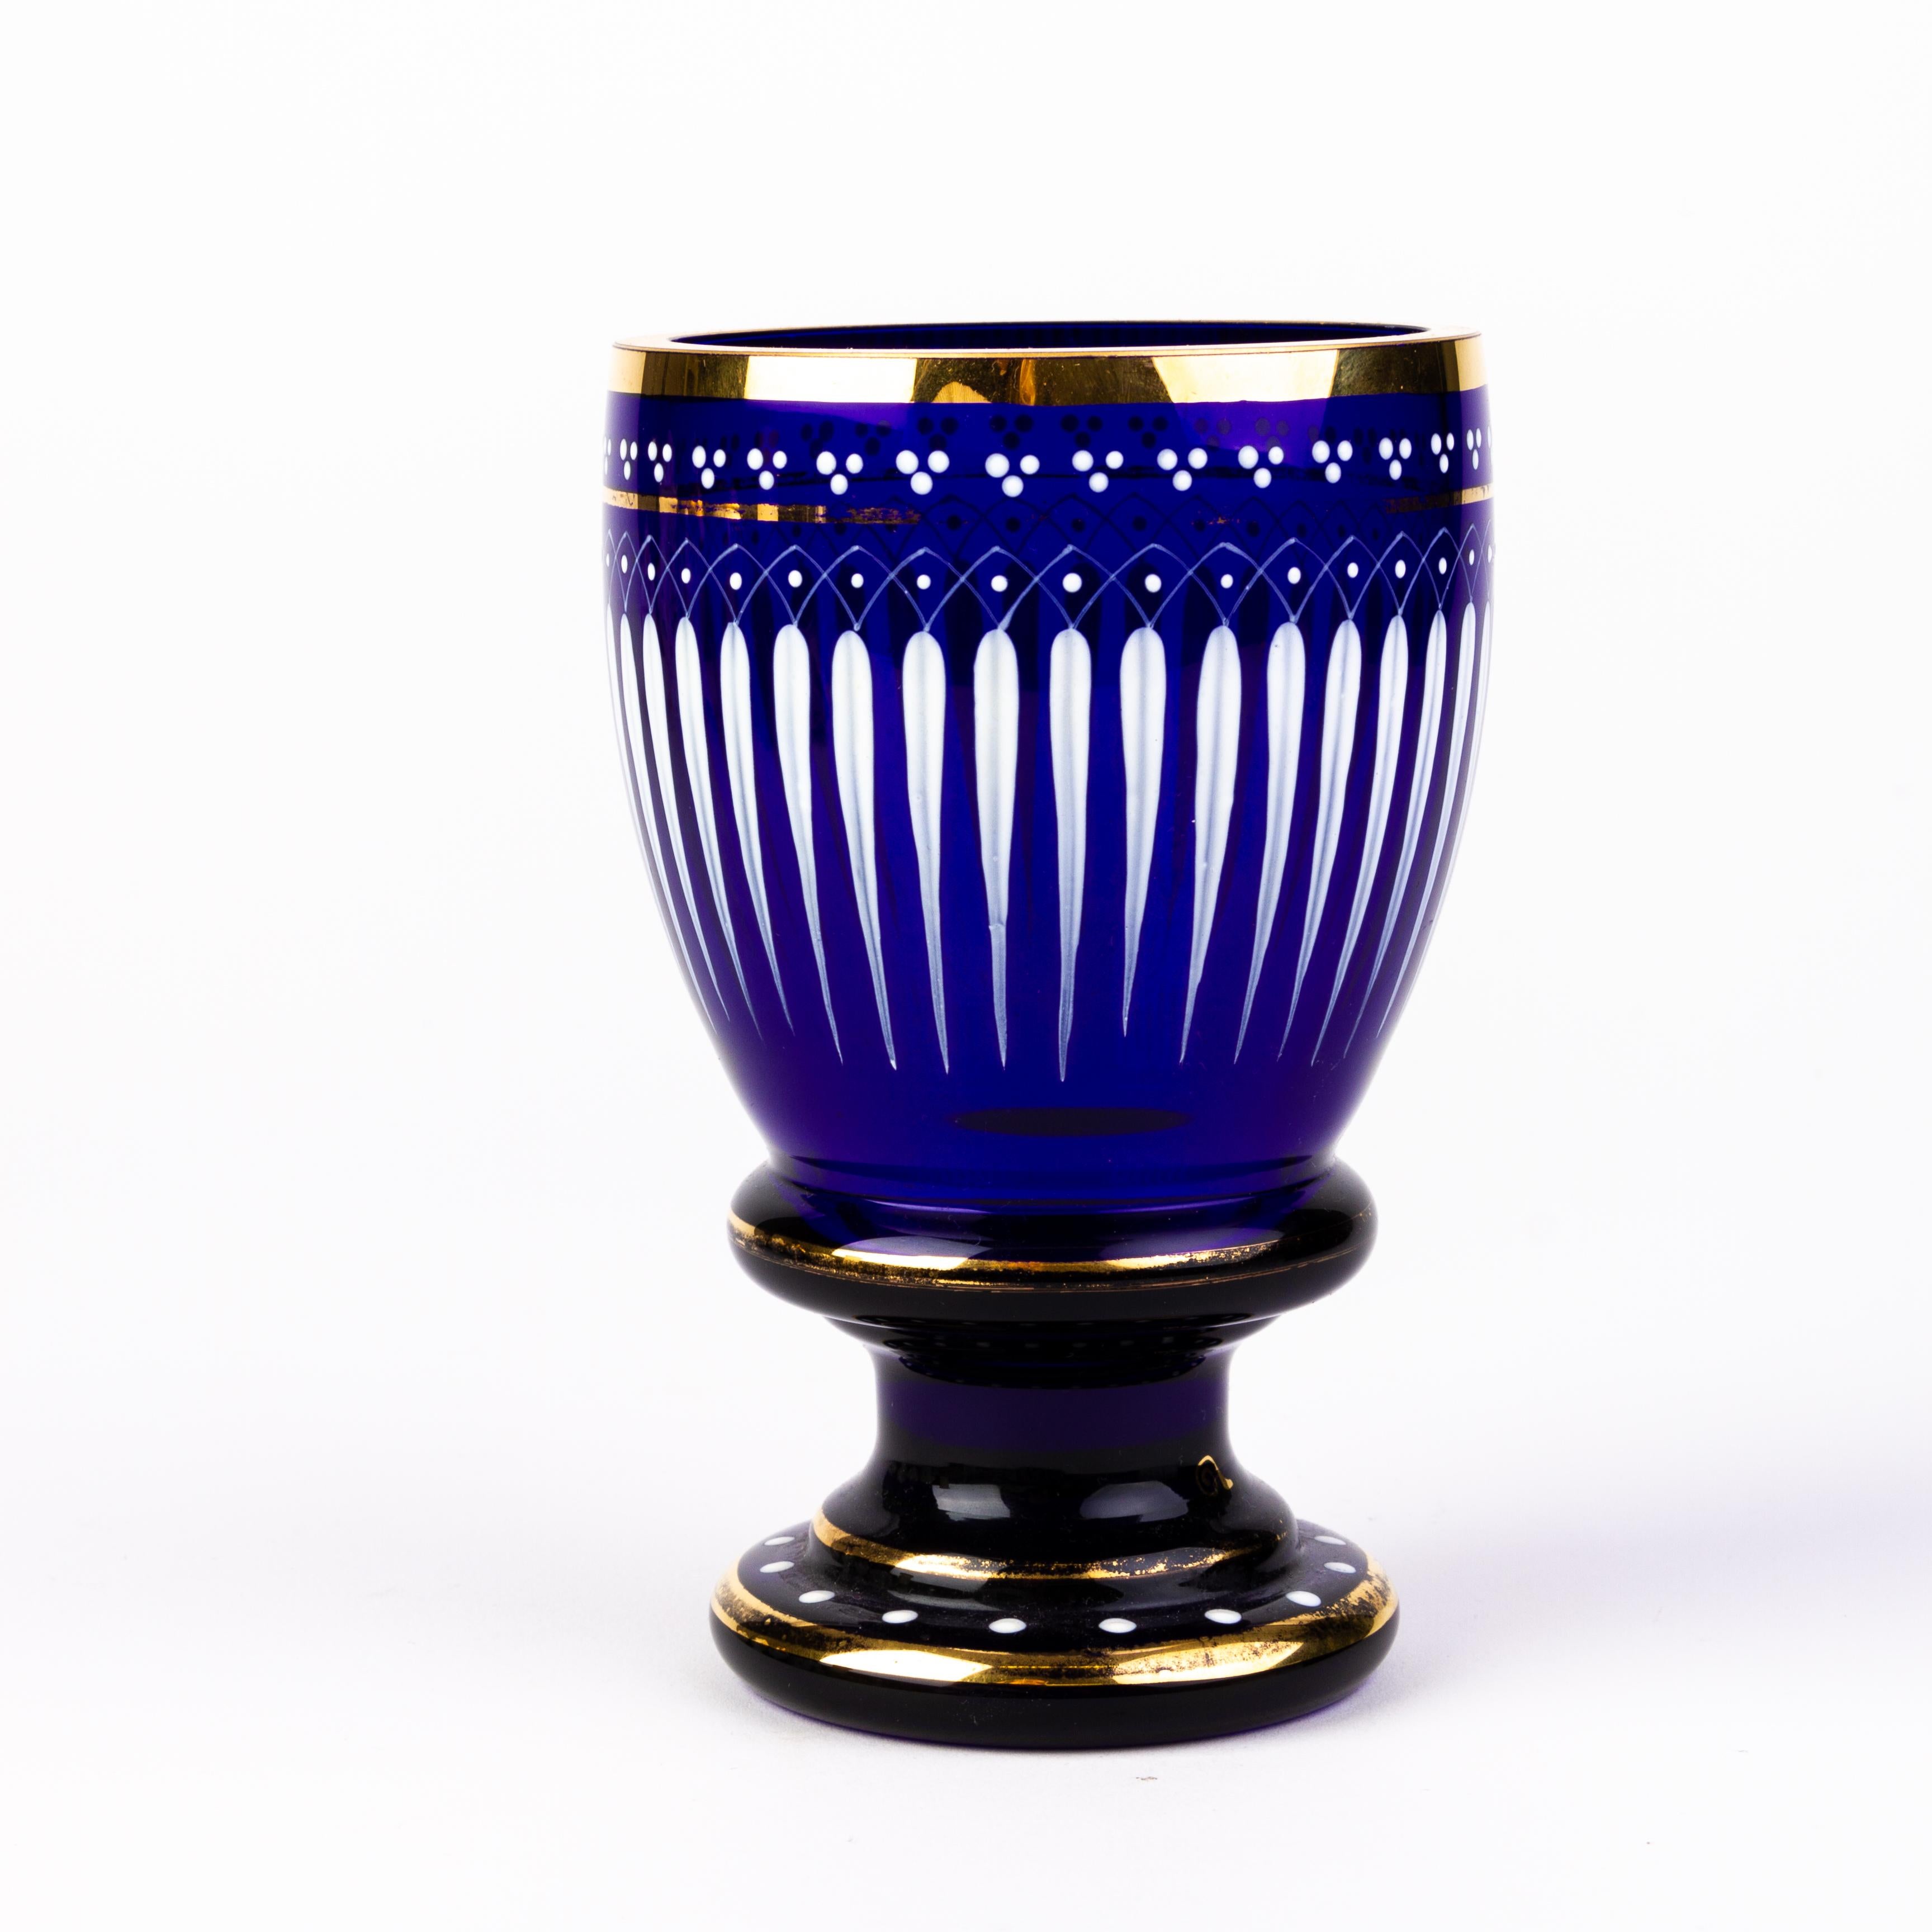 19th Century Enamel Painted Bristol Blue Glass Goblet with Gold Rims